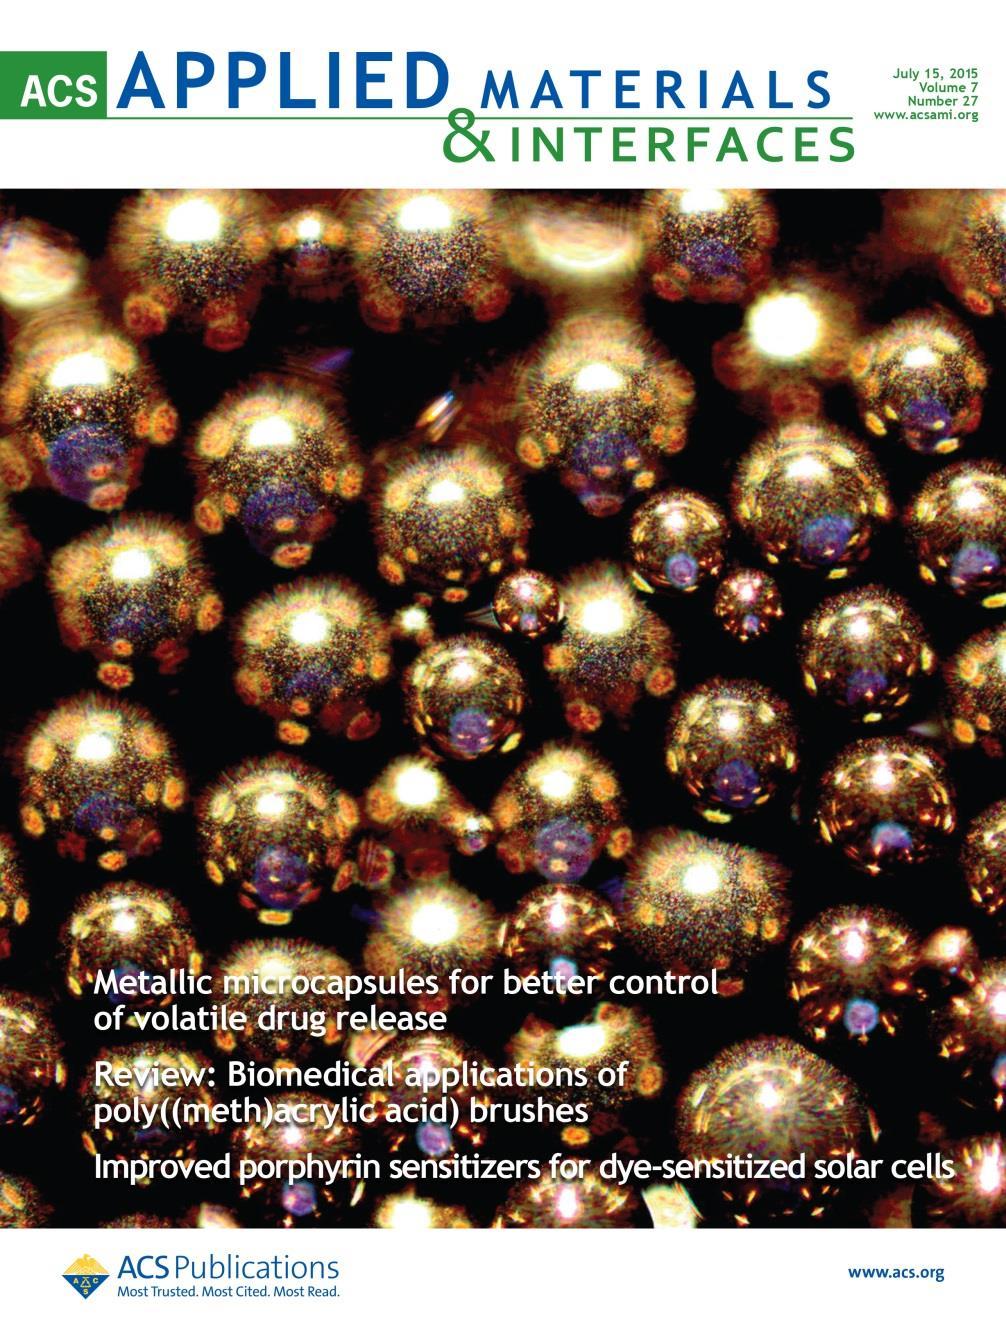 adsorption of the primary catalytic nanoparticles Resulting capsules are non permeable to small, volatile molecules which is very hard to achieve using